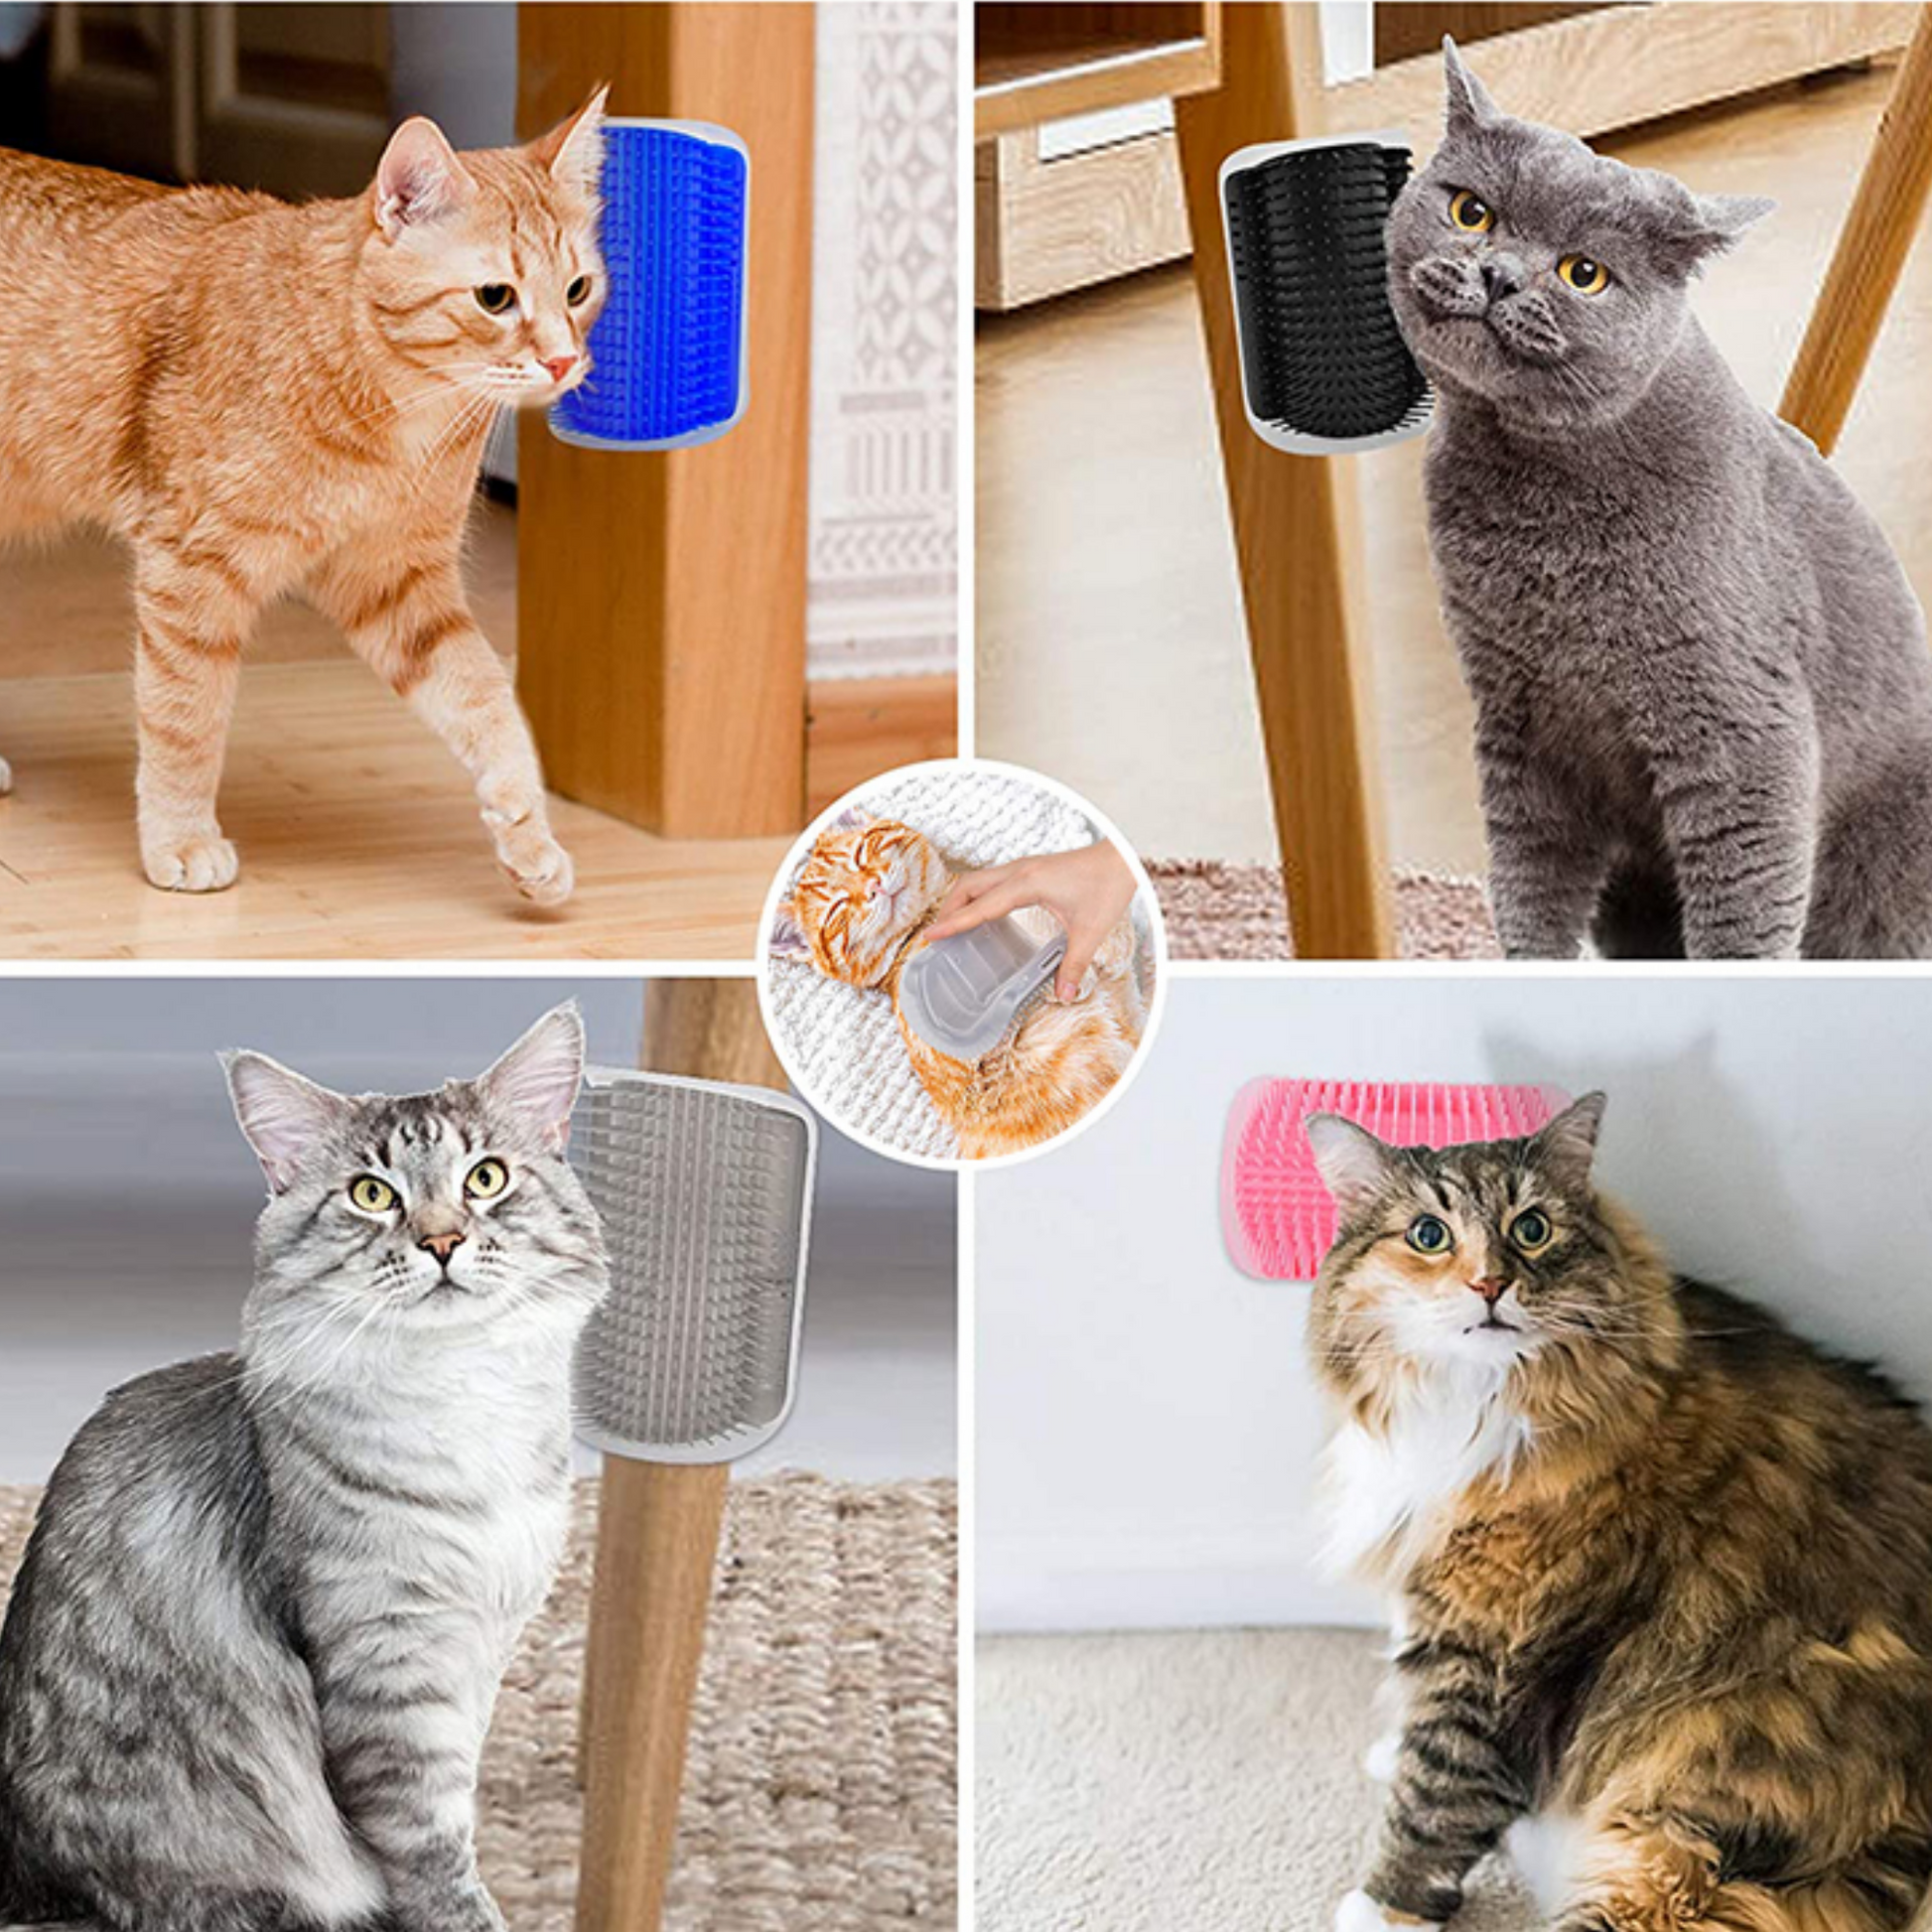 Cat Grooming Made Easy - Wall Mounted Self-Grooming Brush for Cats